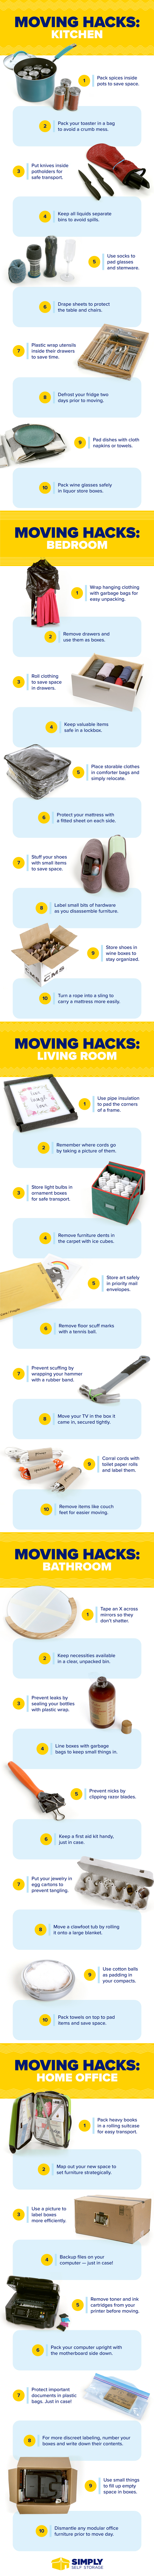 No More Moving-House Blues: 50 Essential Moving Hacks - Infographic